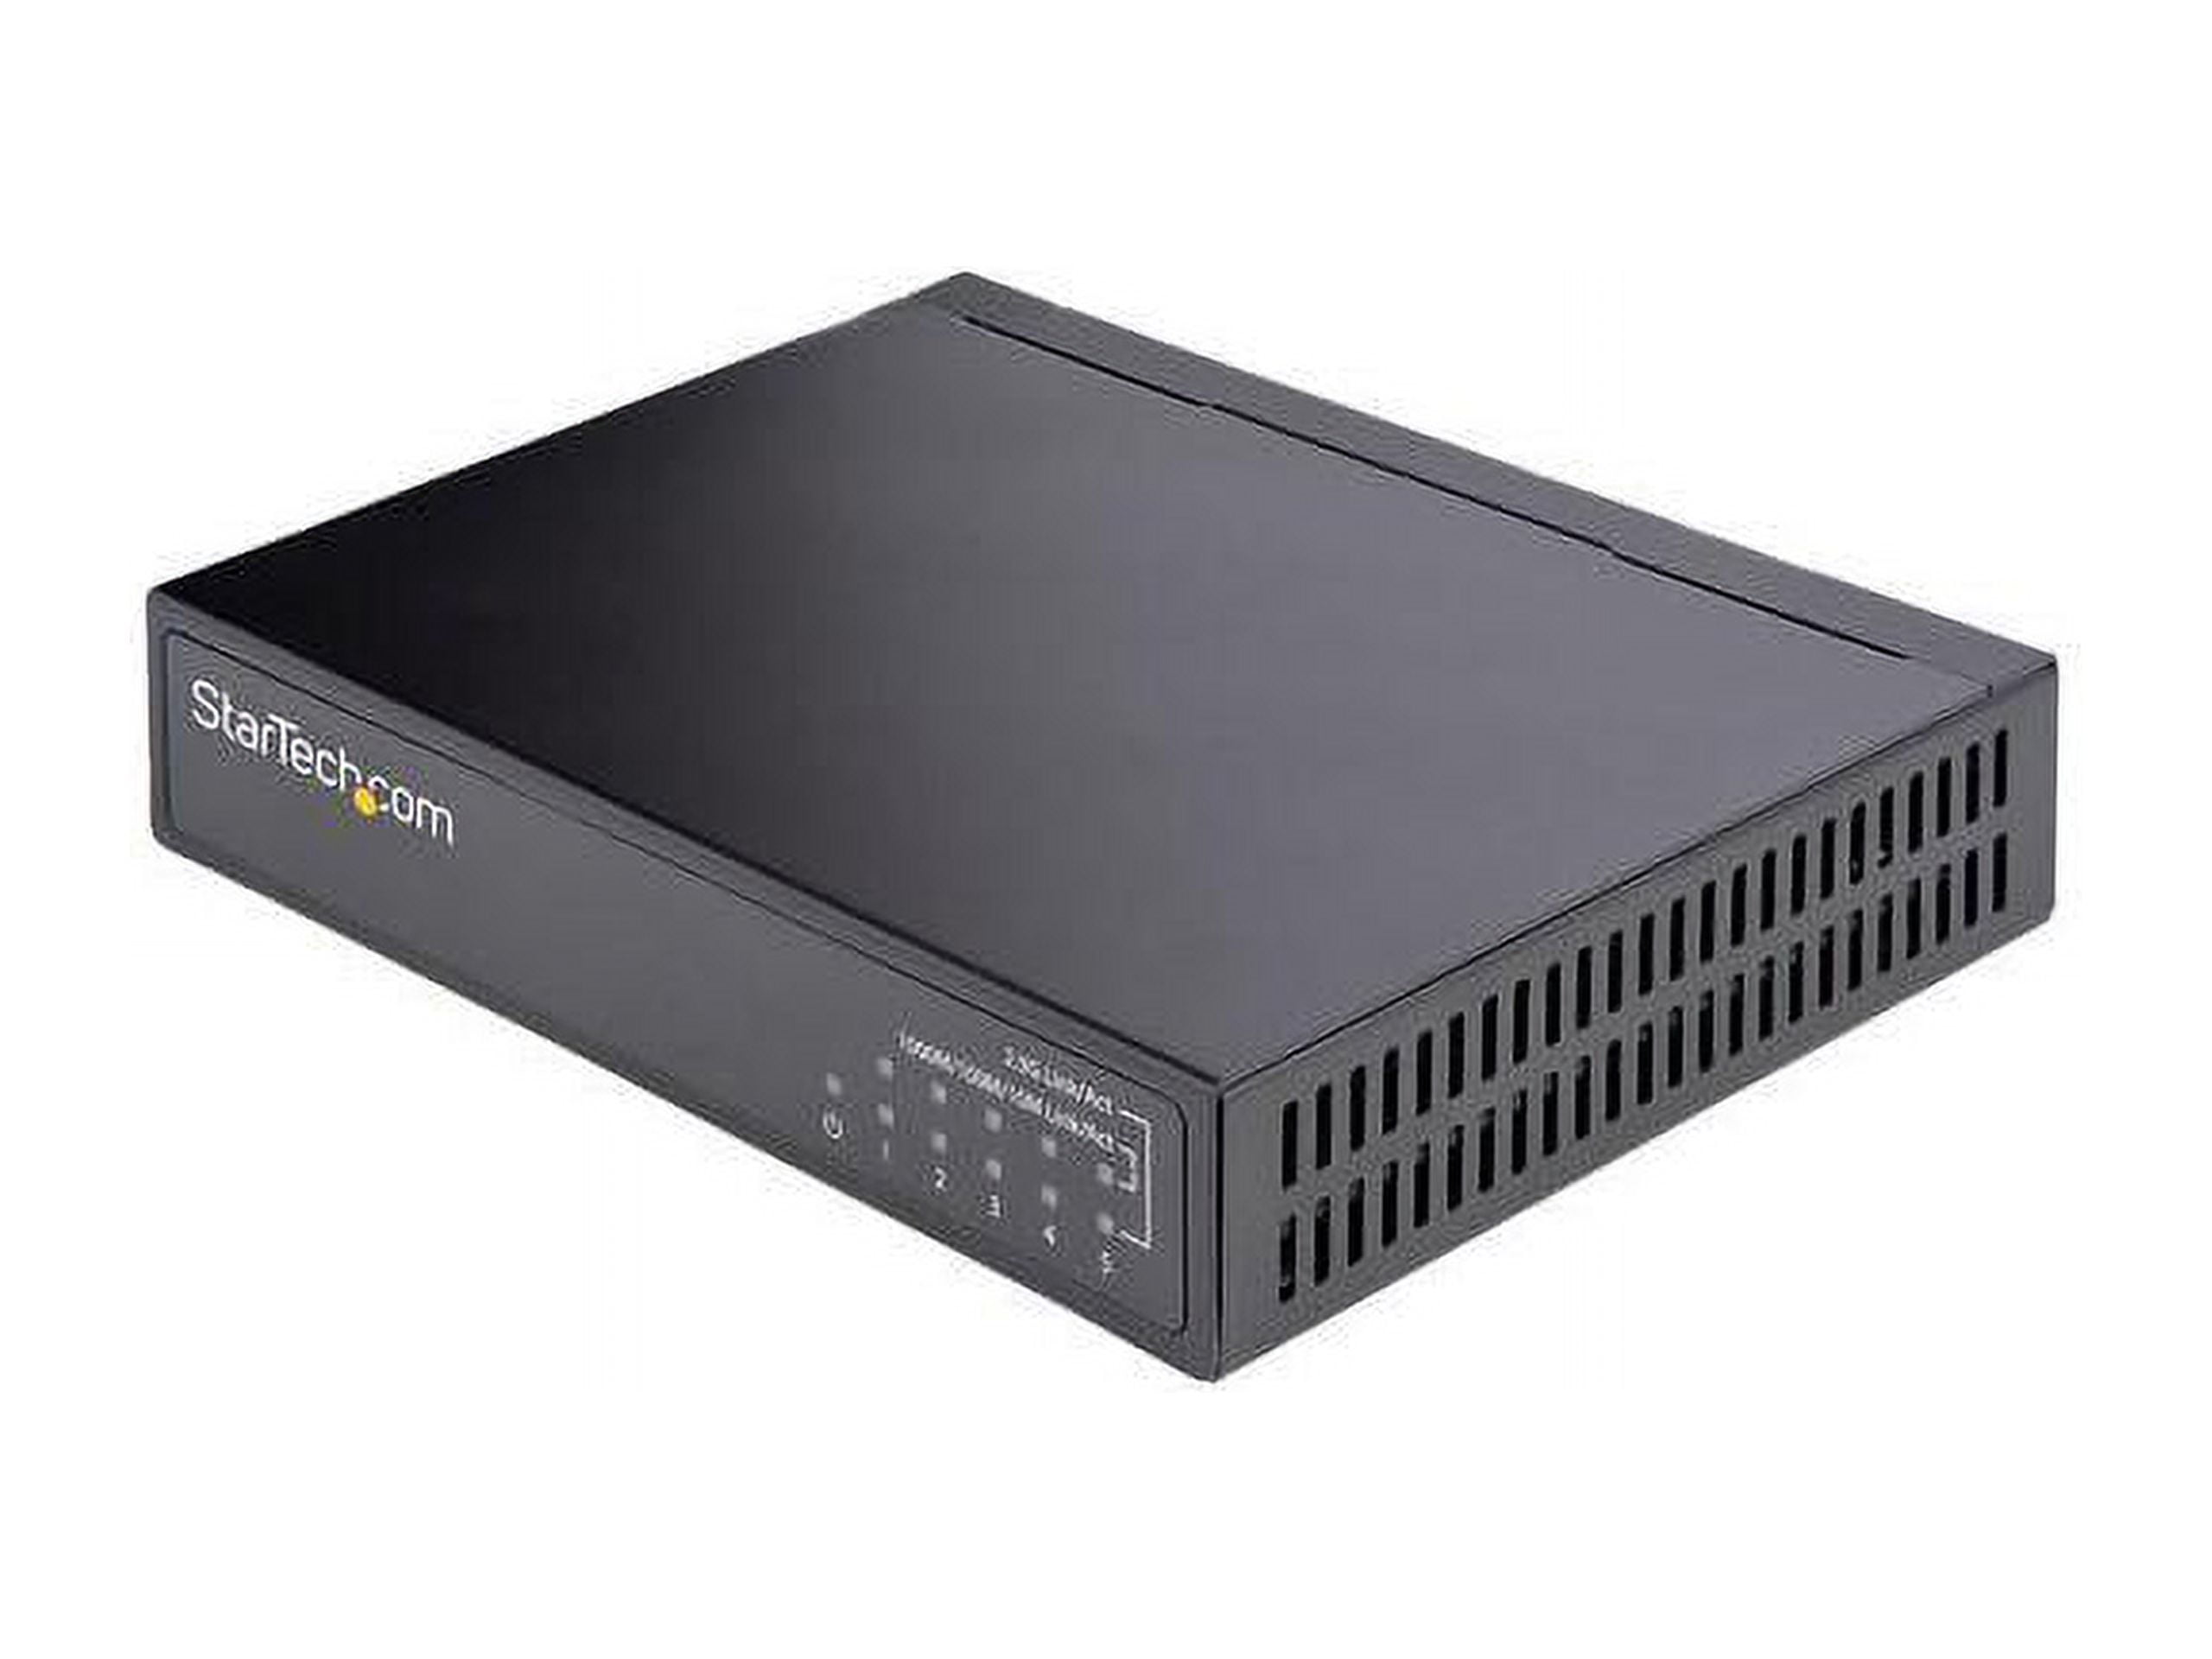  MokerLink 5 Port 2.5G Ethernet Switch, 5 x 2.5GBASE-T